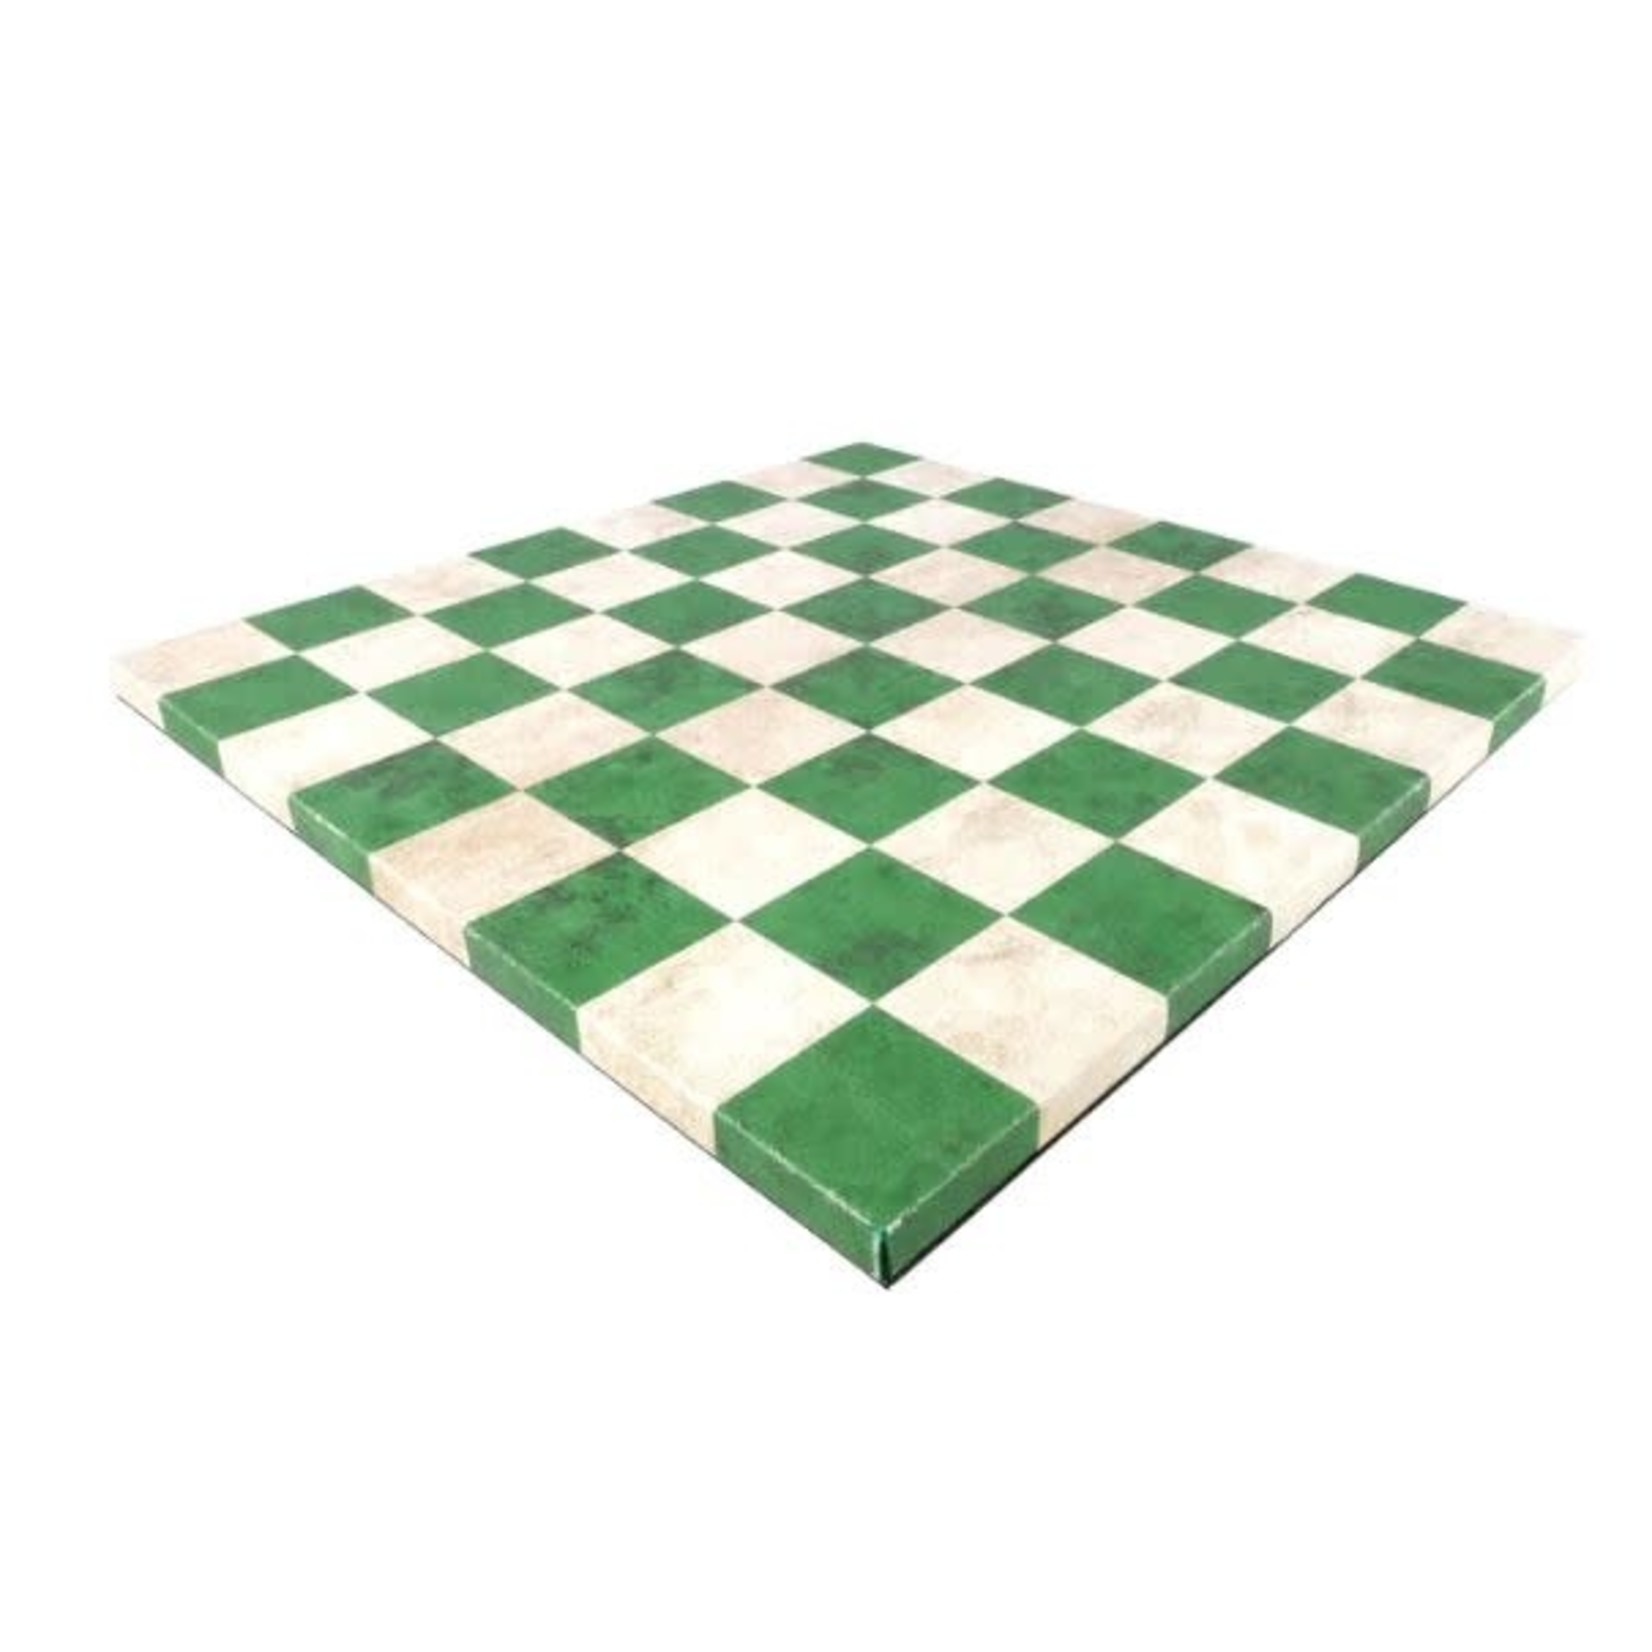 Worldwise Imports 14.5" Leatherette Green and Cream Chessboard